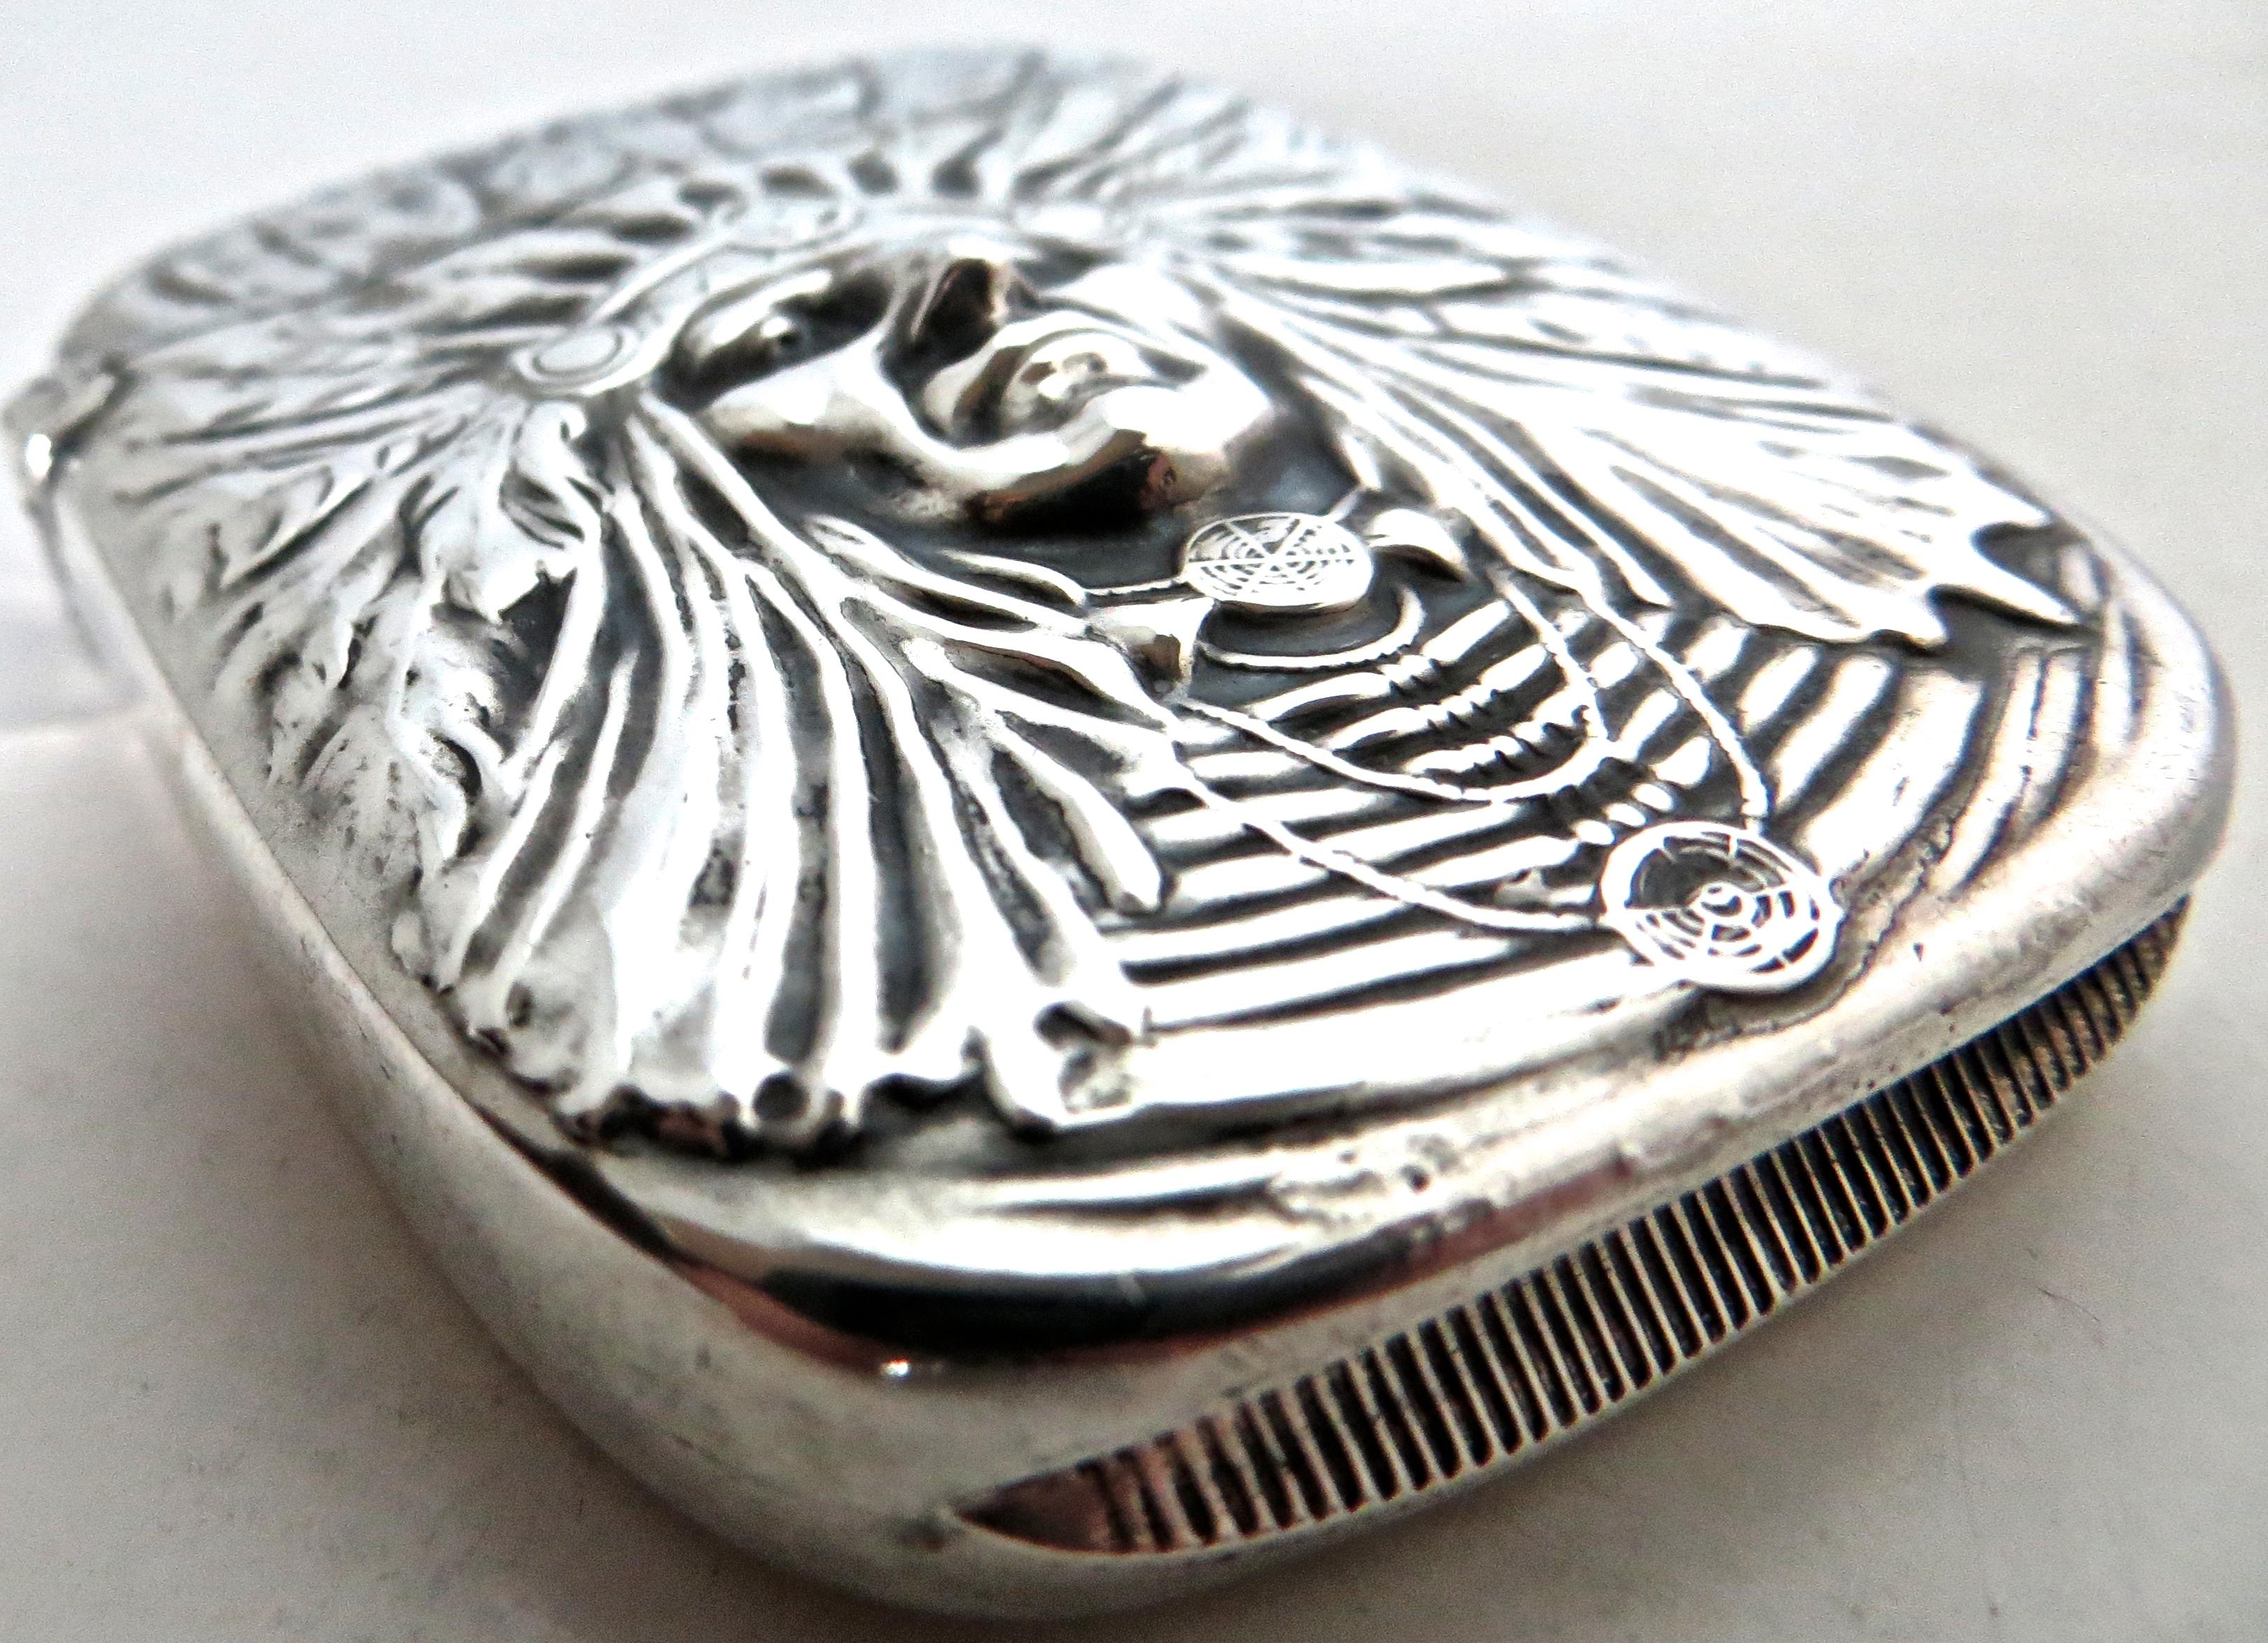 Early 20th Century Art Nouveau Sterling Silver Match Safe, Indian Head, American, circa 1905